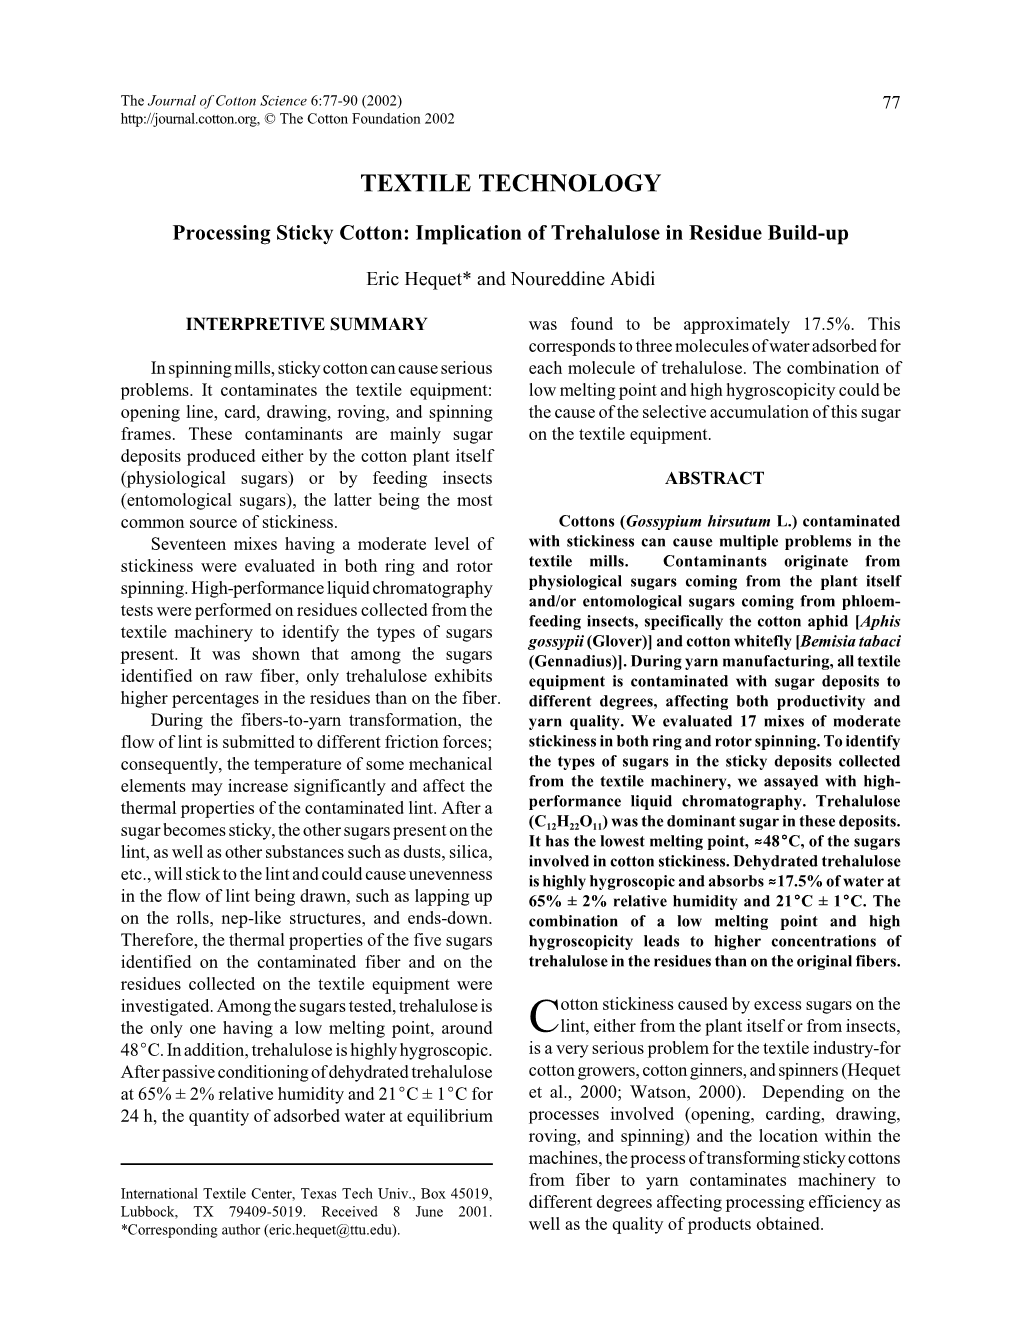 Processing Sticky Cotton: Implication of Trehalulose in Residue Build-Up